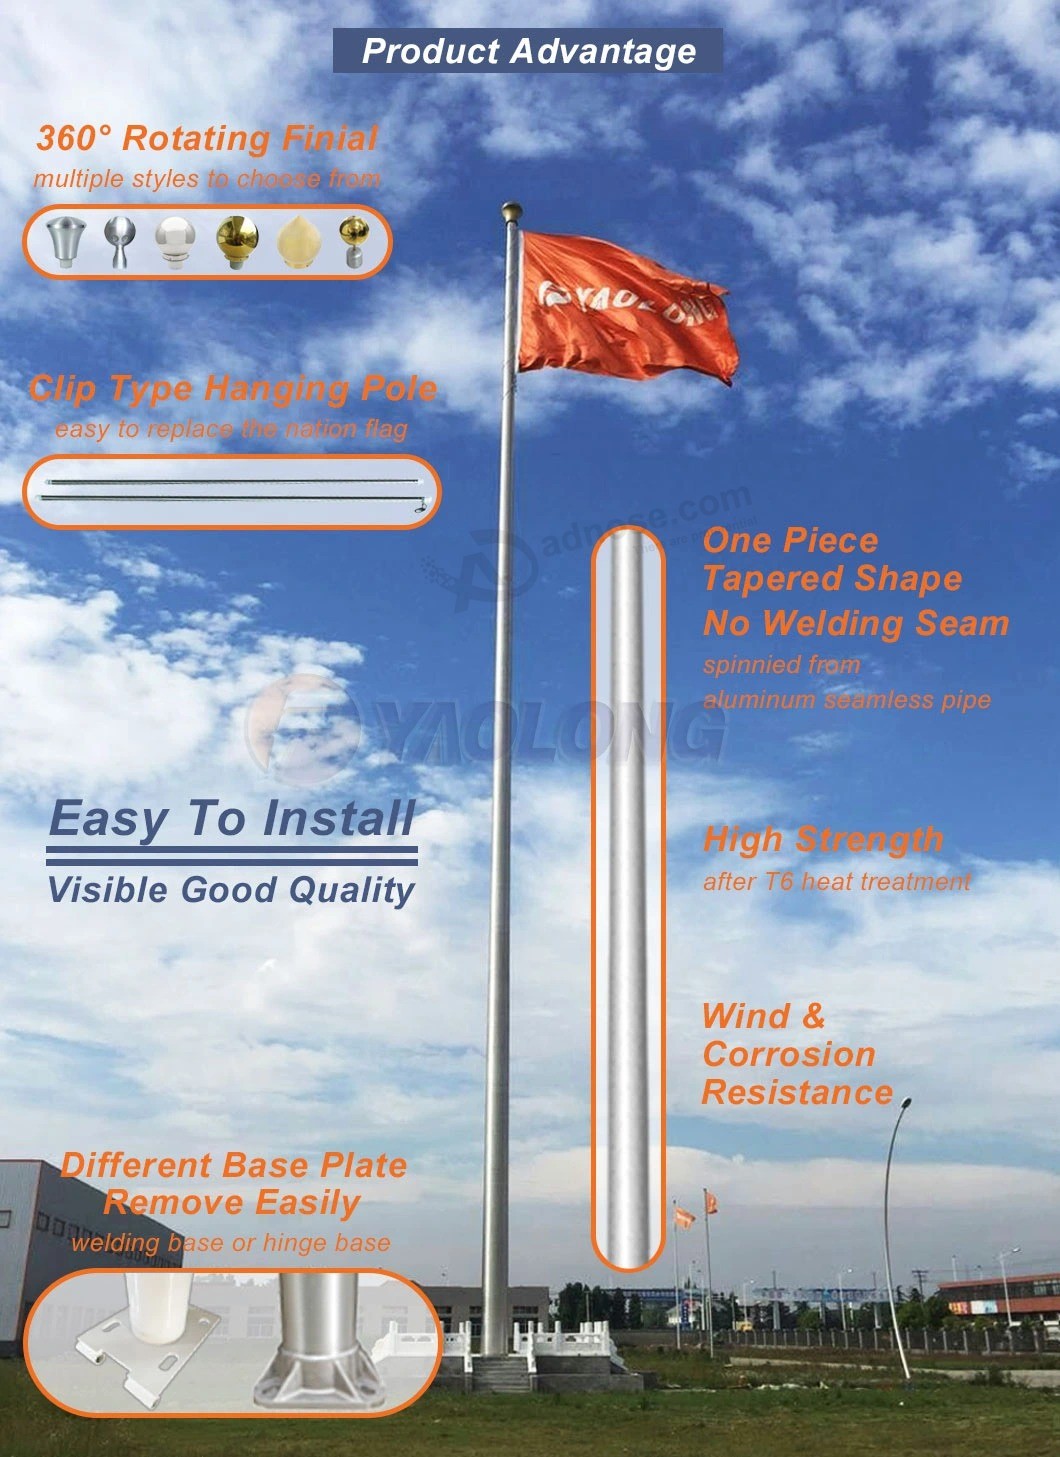 Lightweight Aluminum Flag Pole with Internal Halyard for Olympic Village